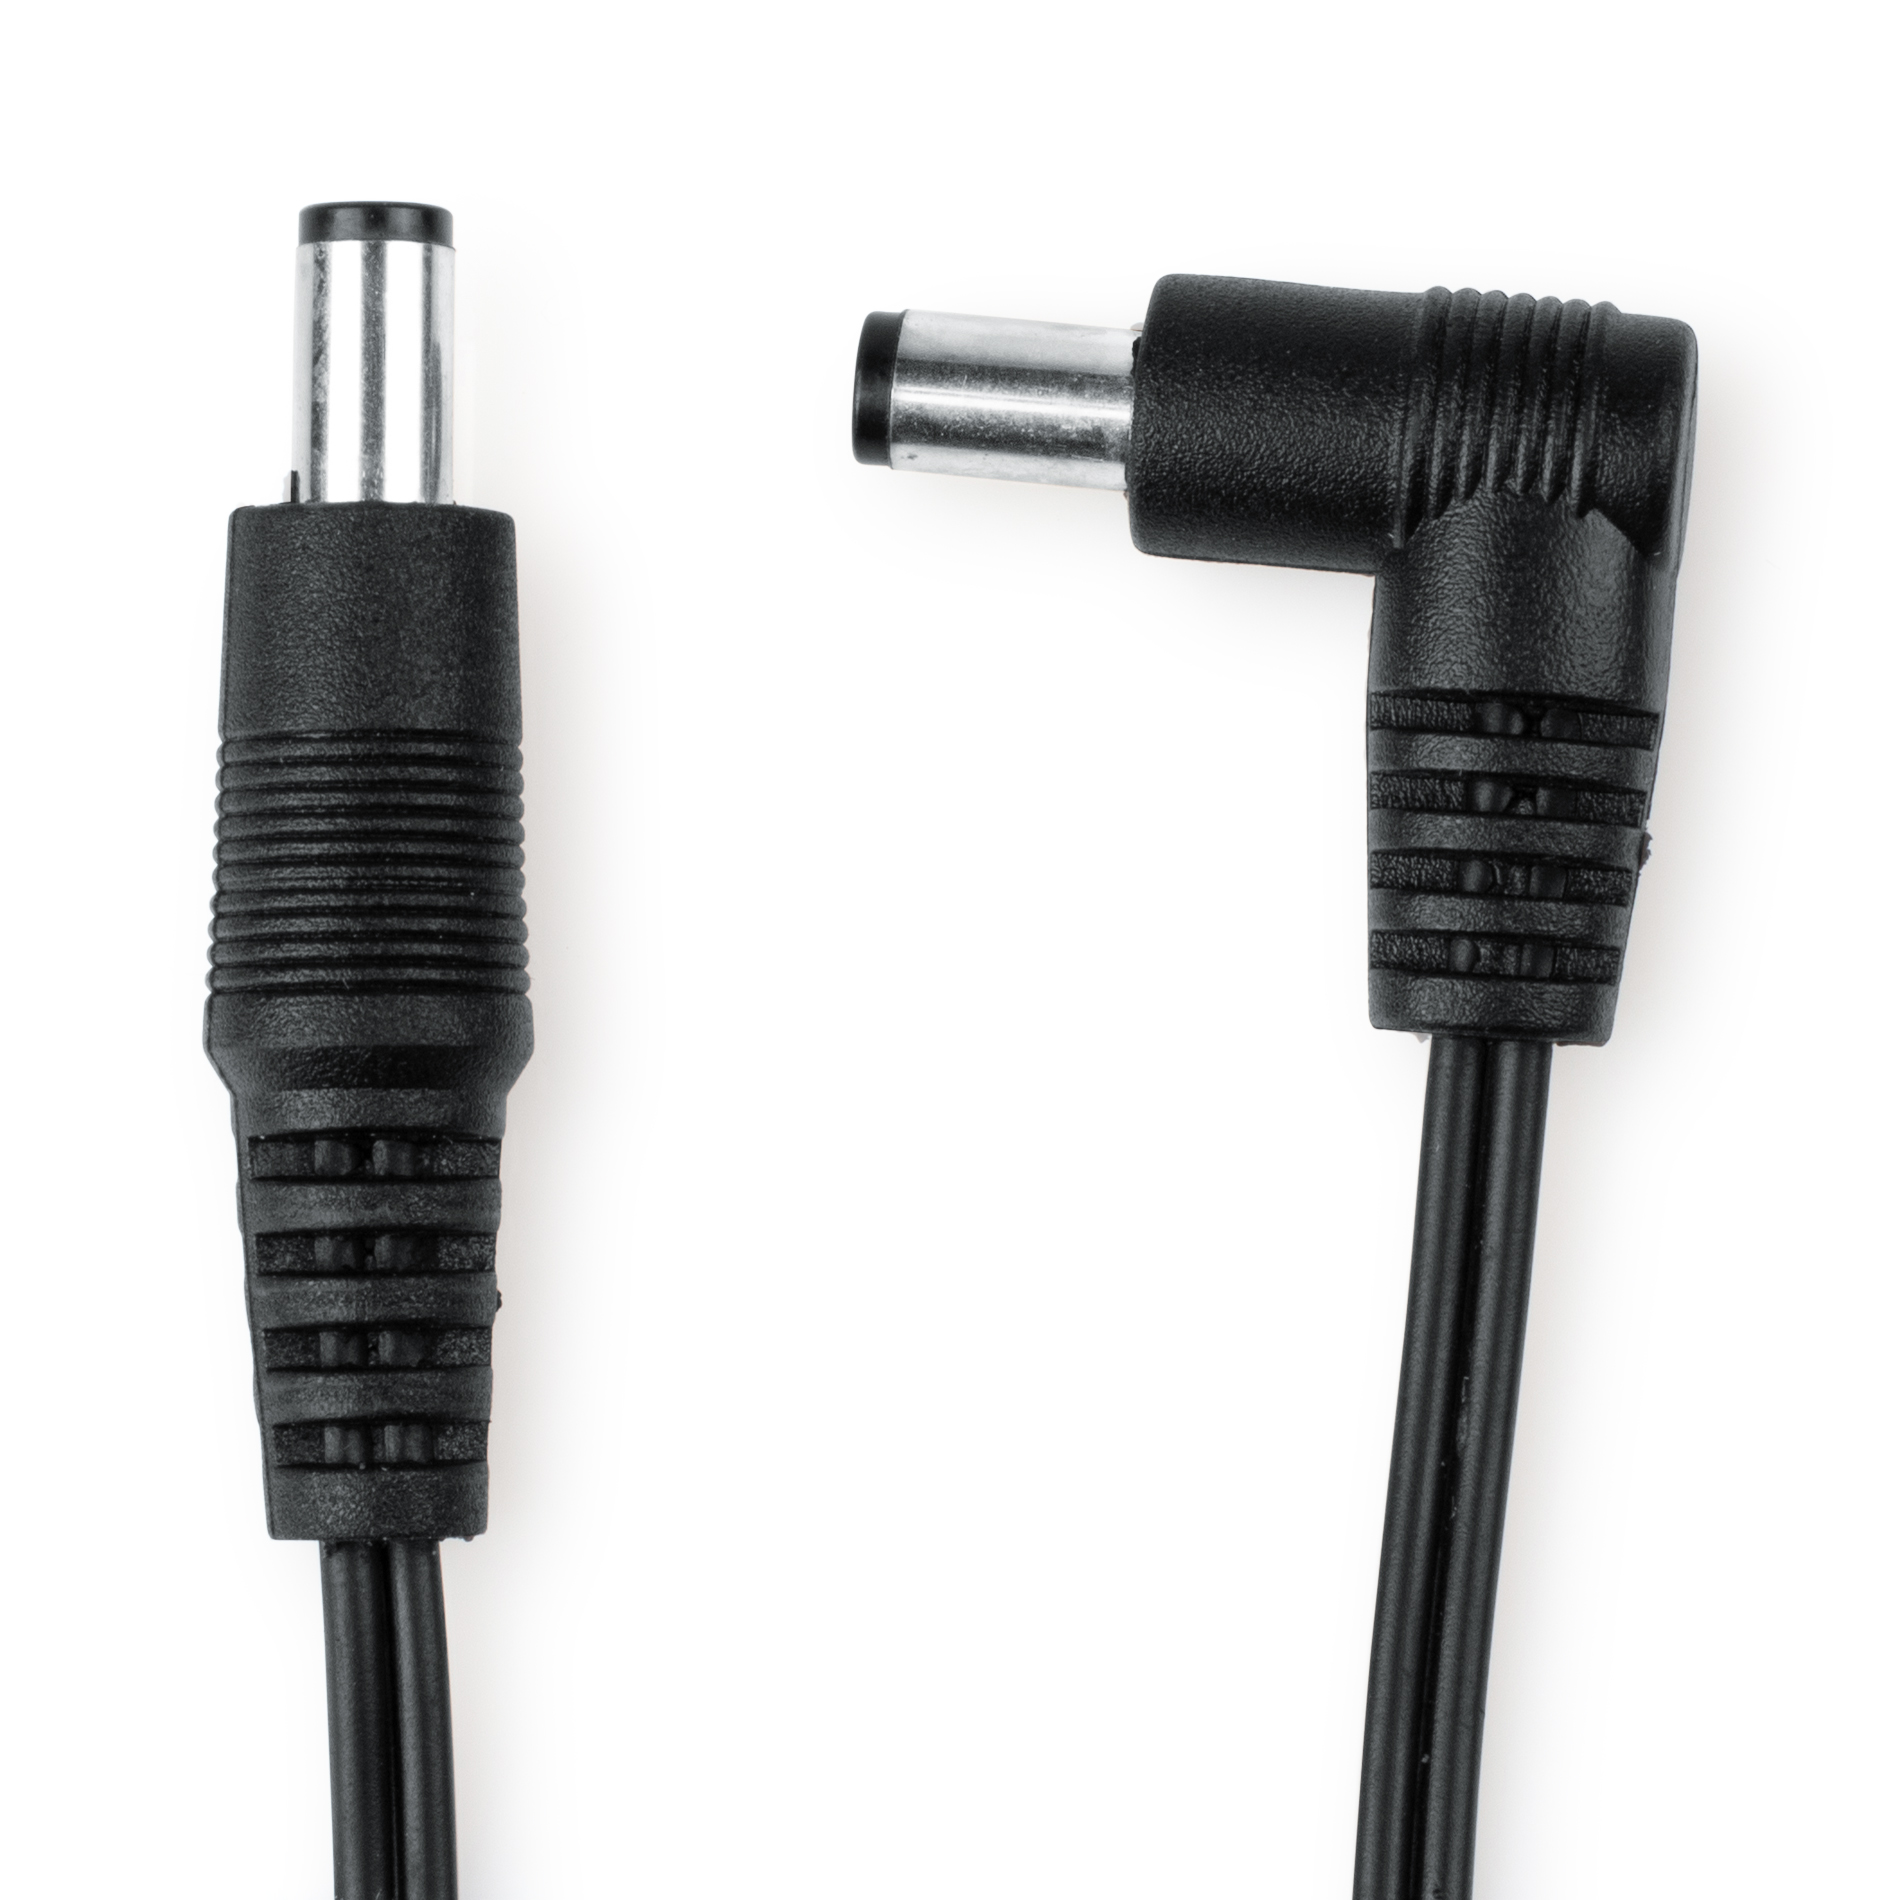 Single DC Power Cable for Pedals – 40″ Long-GTR-PWR-DCP40